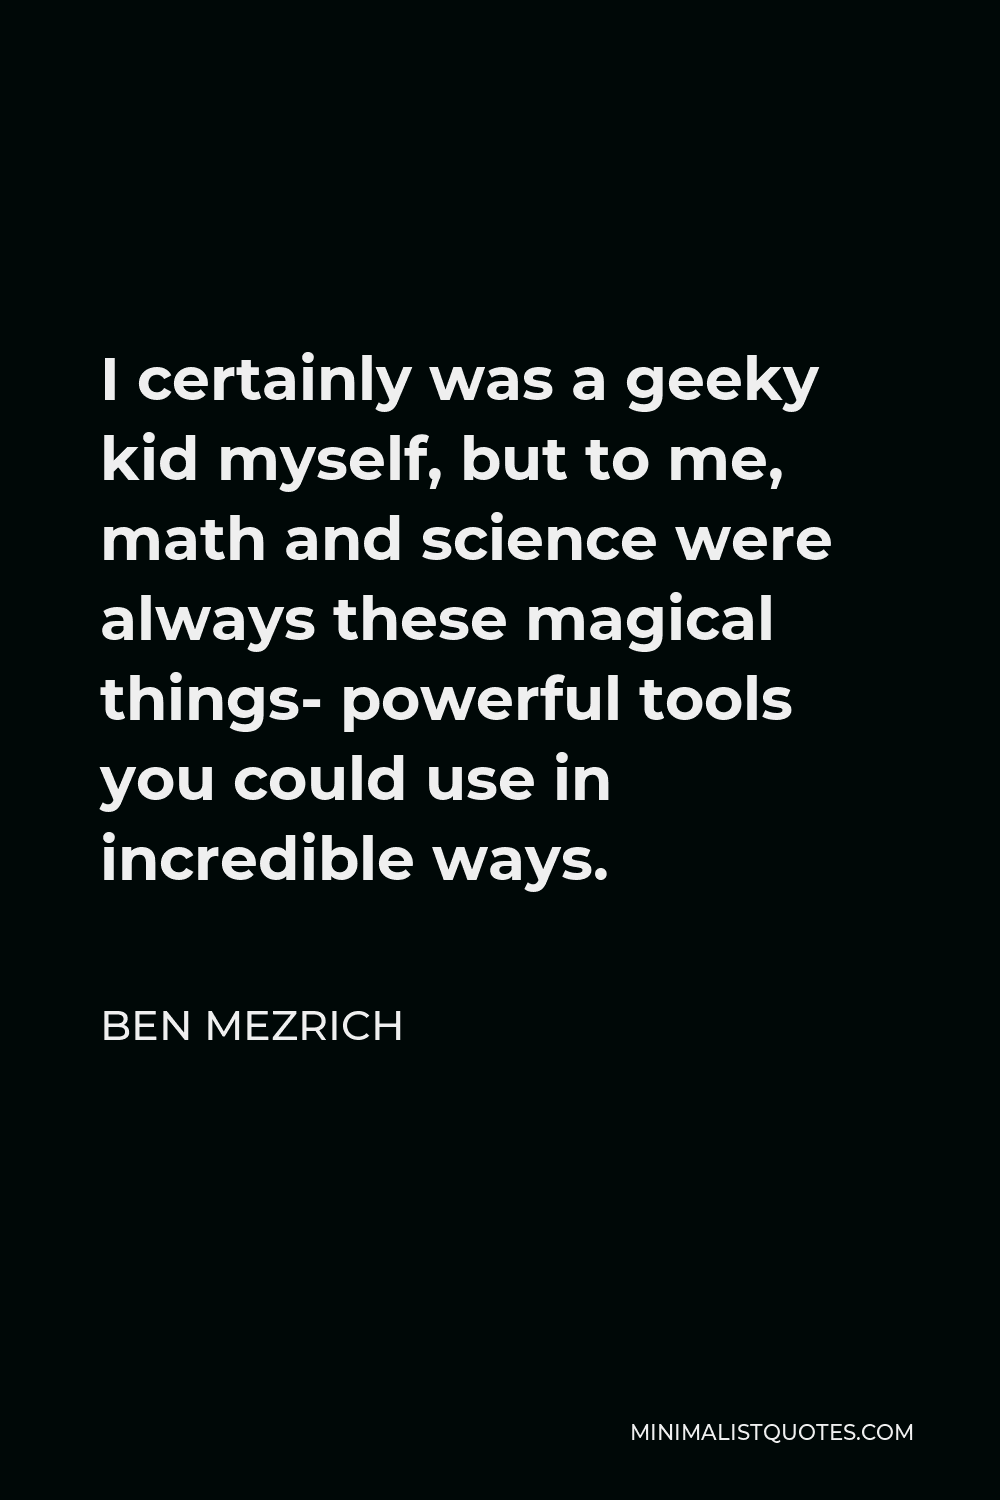 Ben Mezrich Quote - I certainly was a geeky kid myself, but to me, math and science were always these magical things- powerful tools you could use in incredible ways.